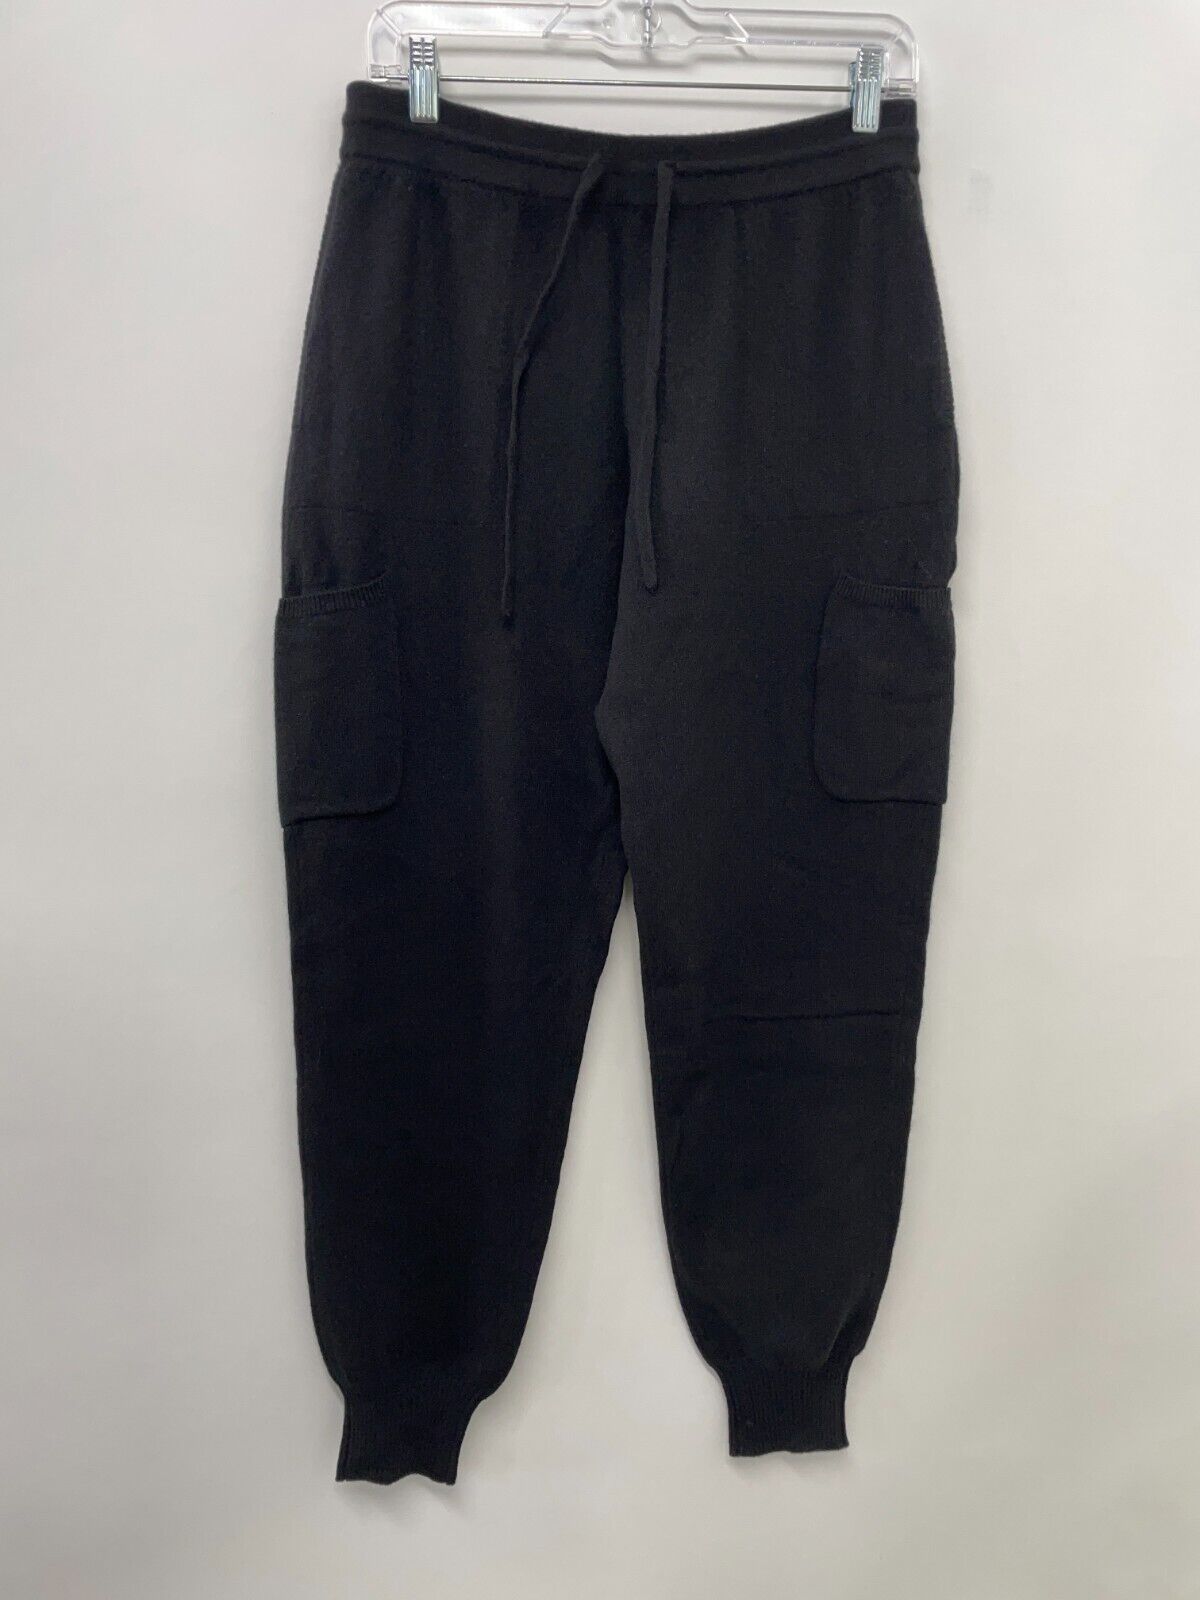 NAADAM Women's M Cashmere Cargo Joggers Black Relaxed Fit Pockets WE02106 NWT